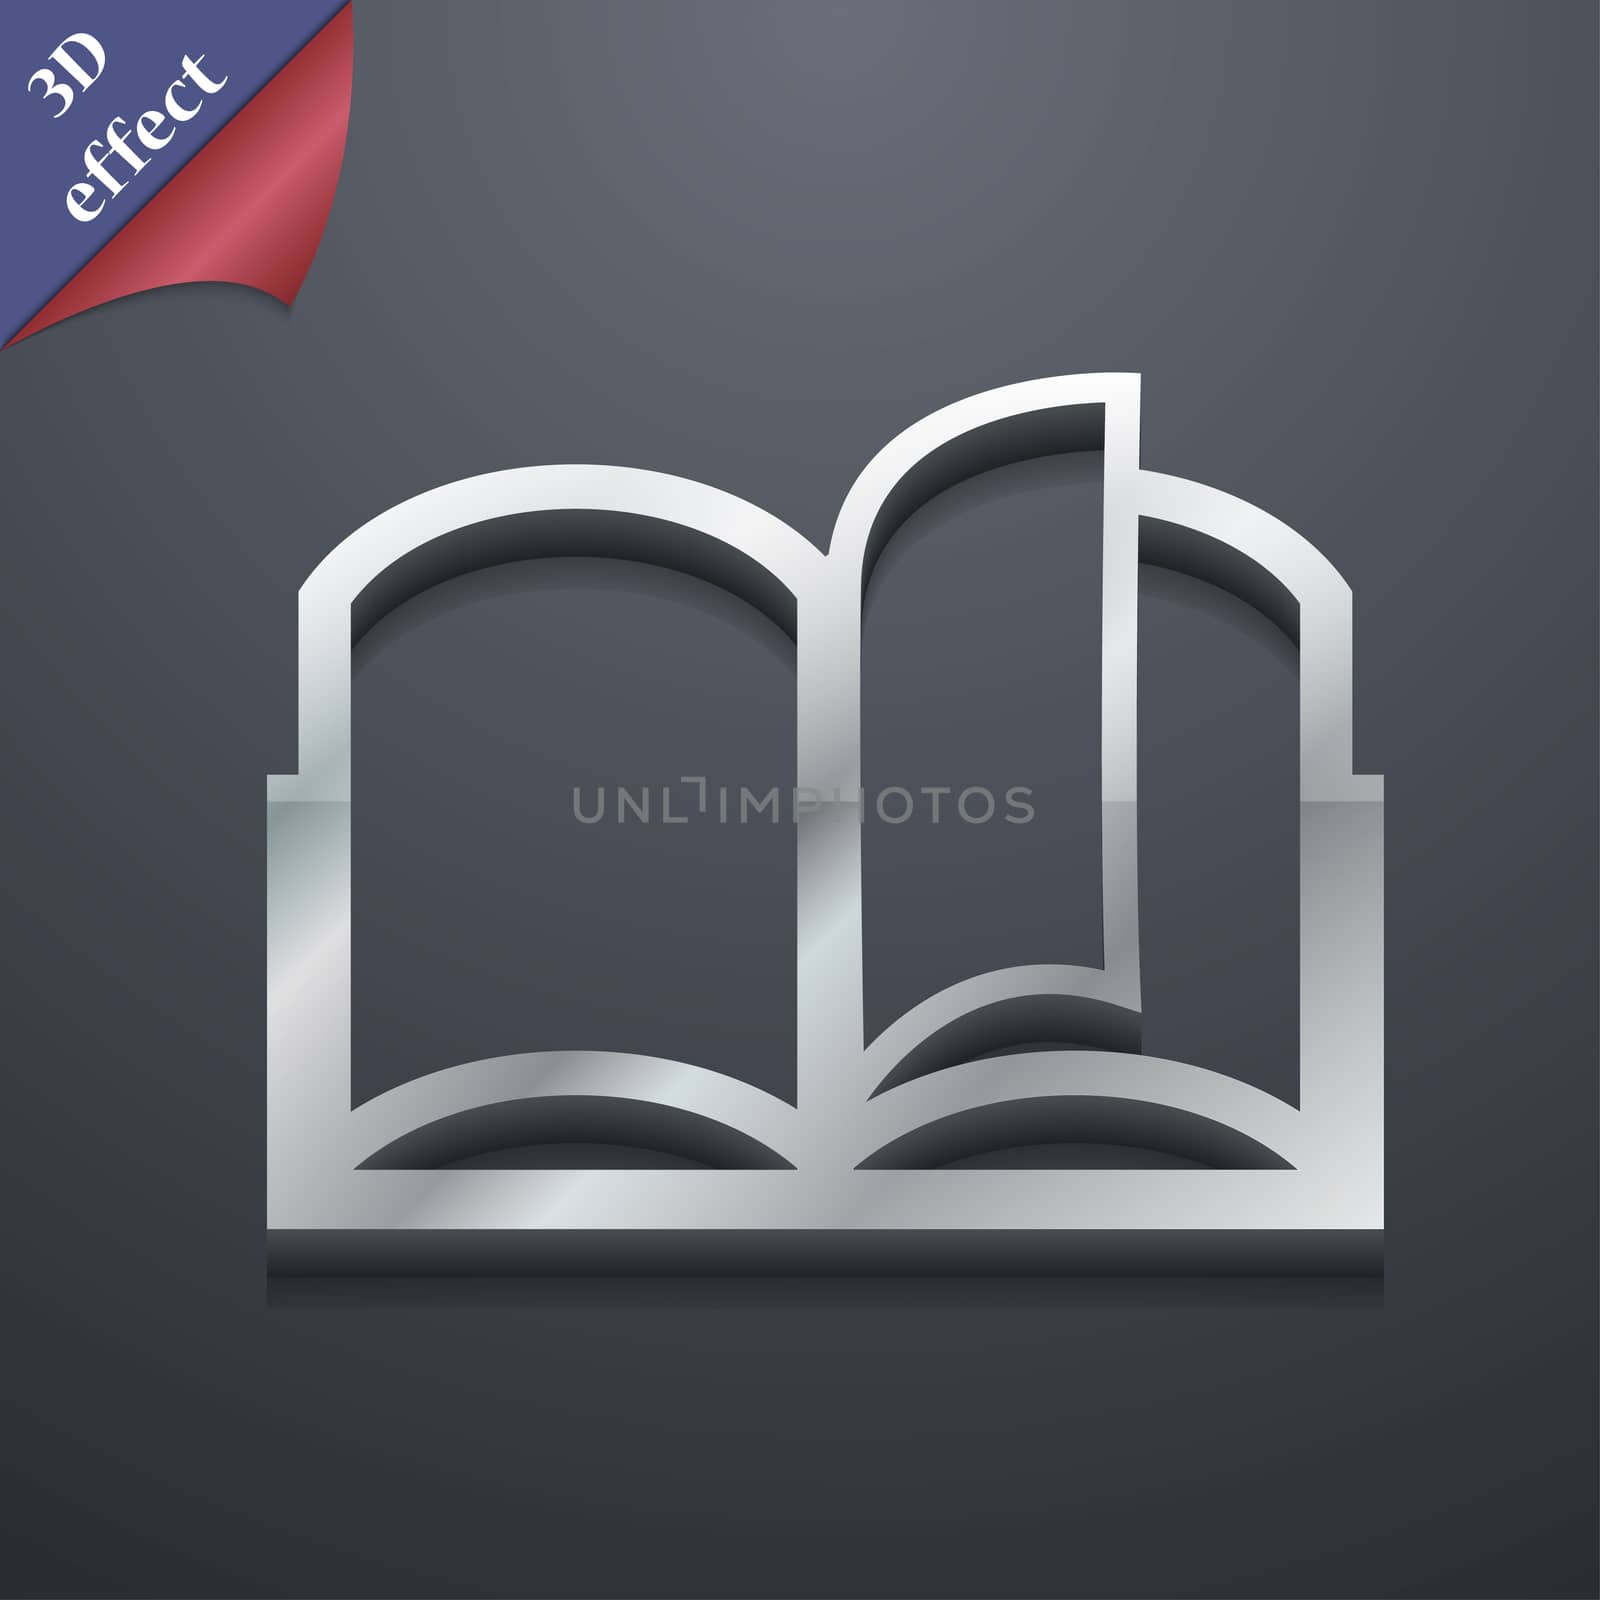 Open book icon symbol. 3D style. Trendy, modern design with space for your text illustration. Rastrized copy